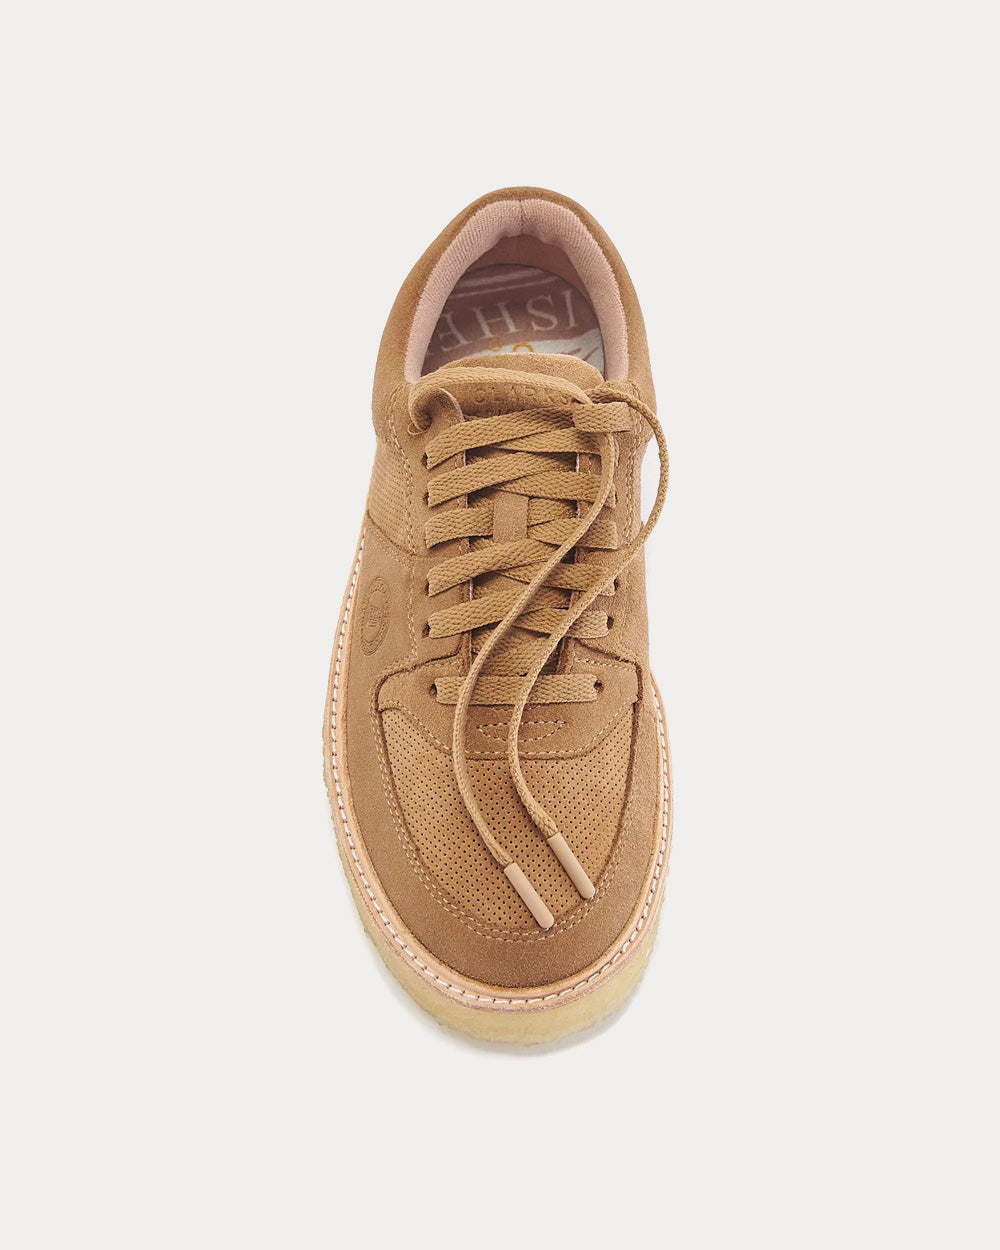 Clarks x Kith - Sandford Suede Tan Low Top Sneakers